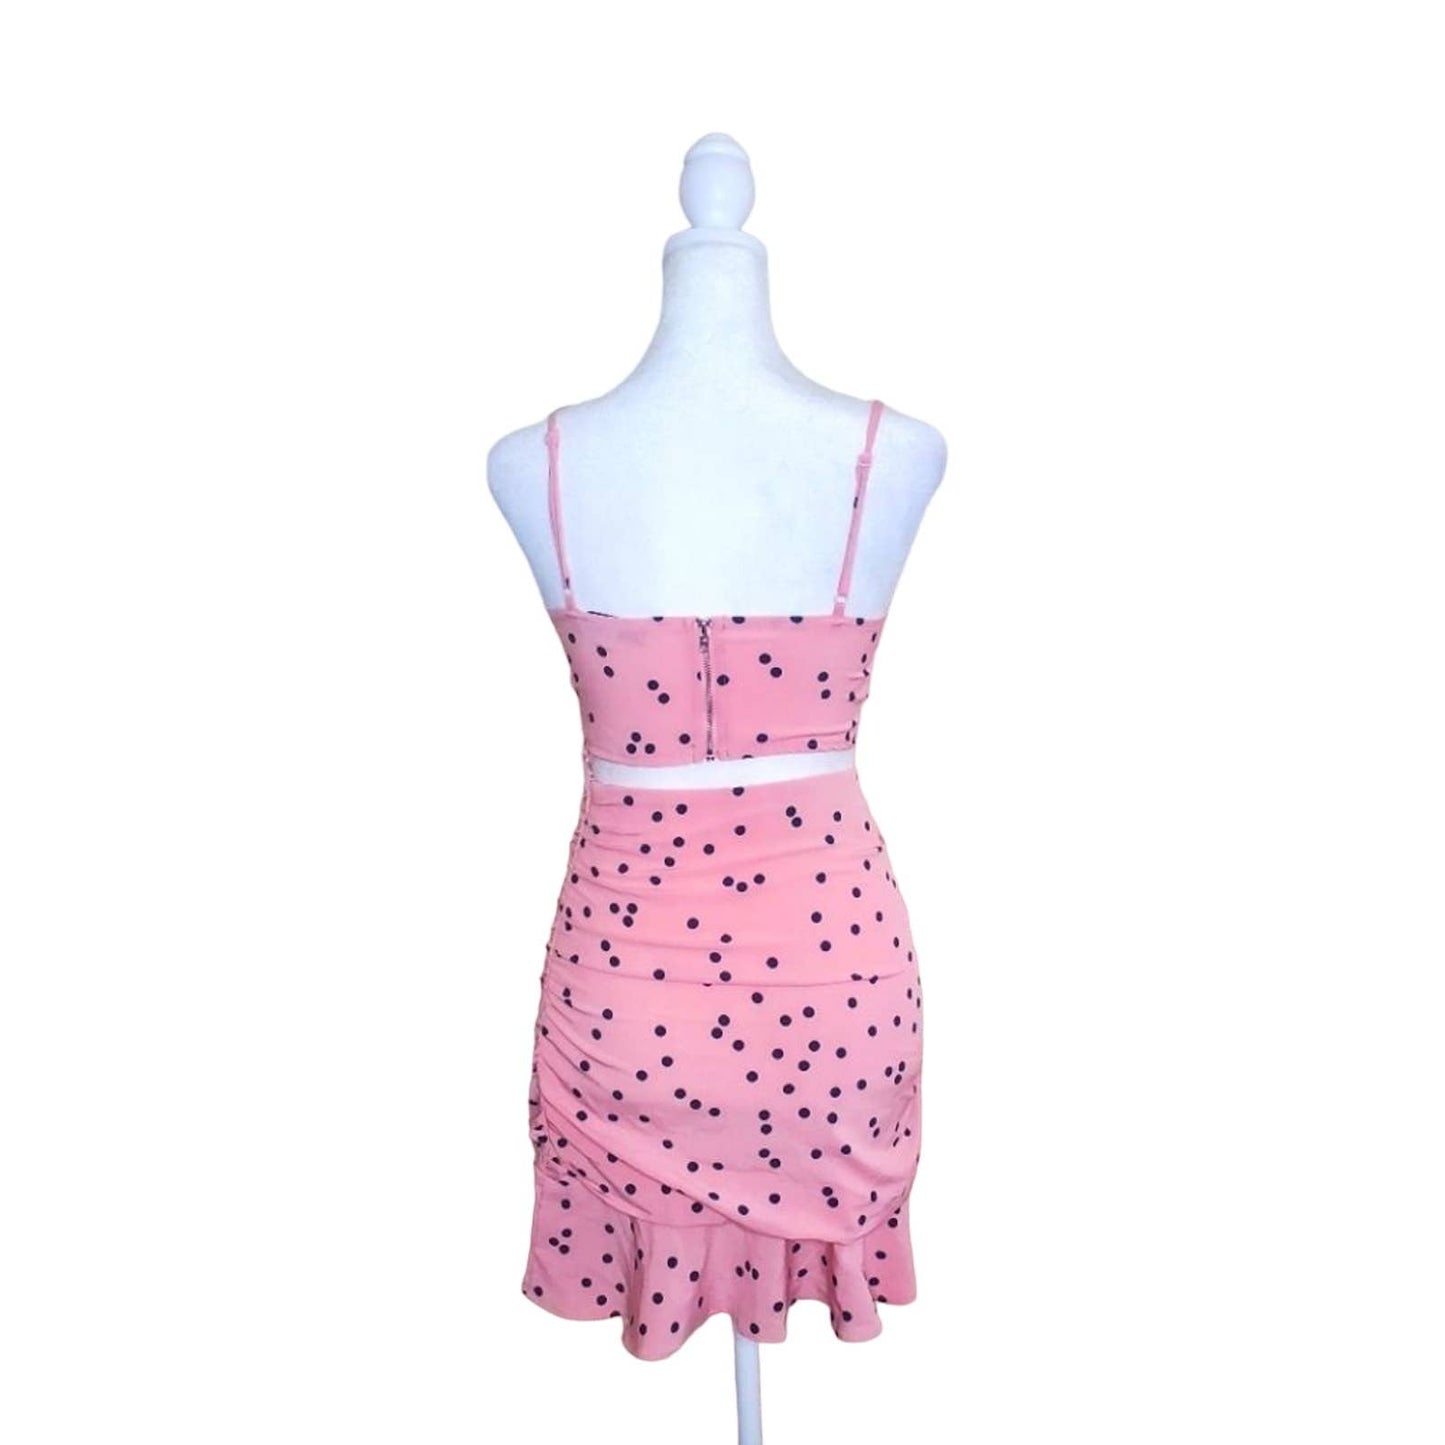 Femme Luxe Bubble Gum Pink with Purple Polka Dots Skirt & Crop Top Set, Size X-Small